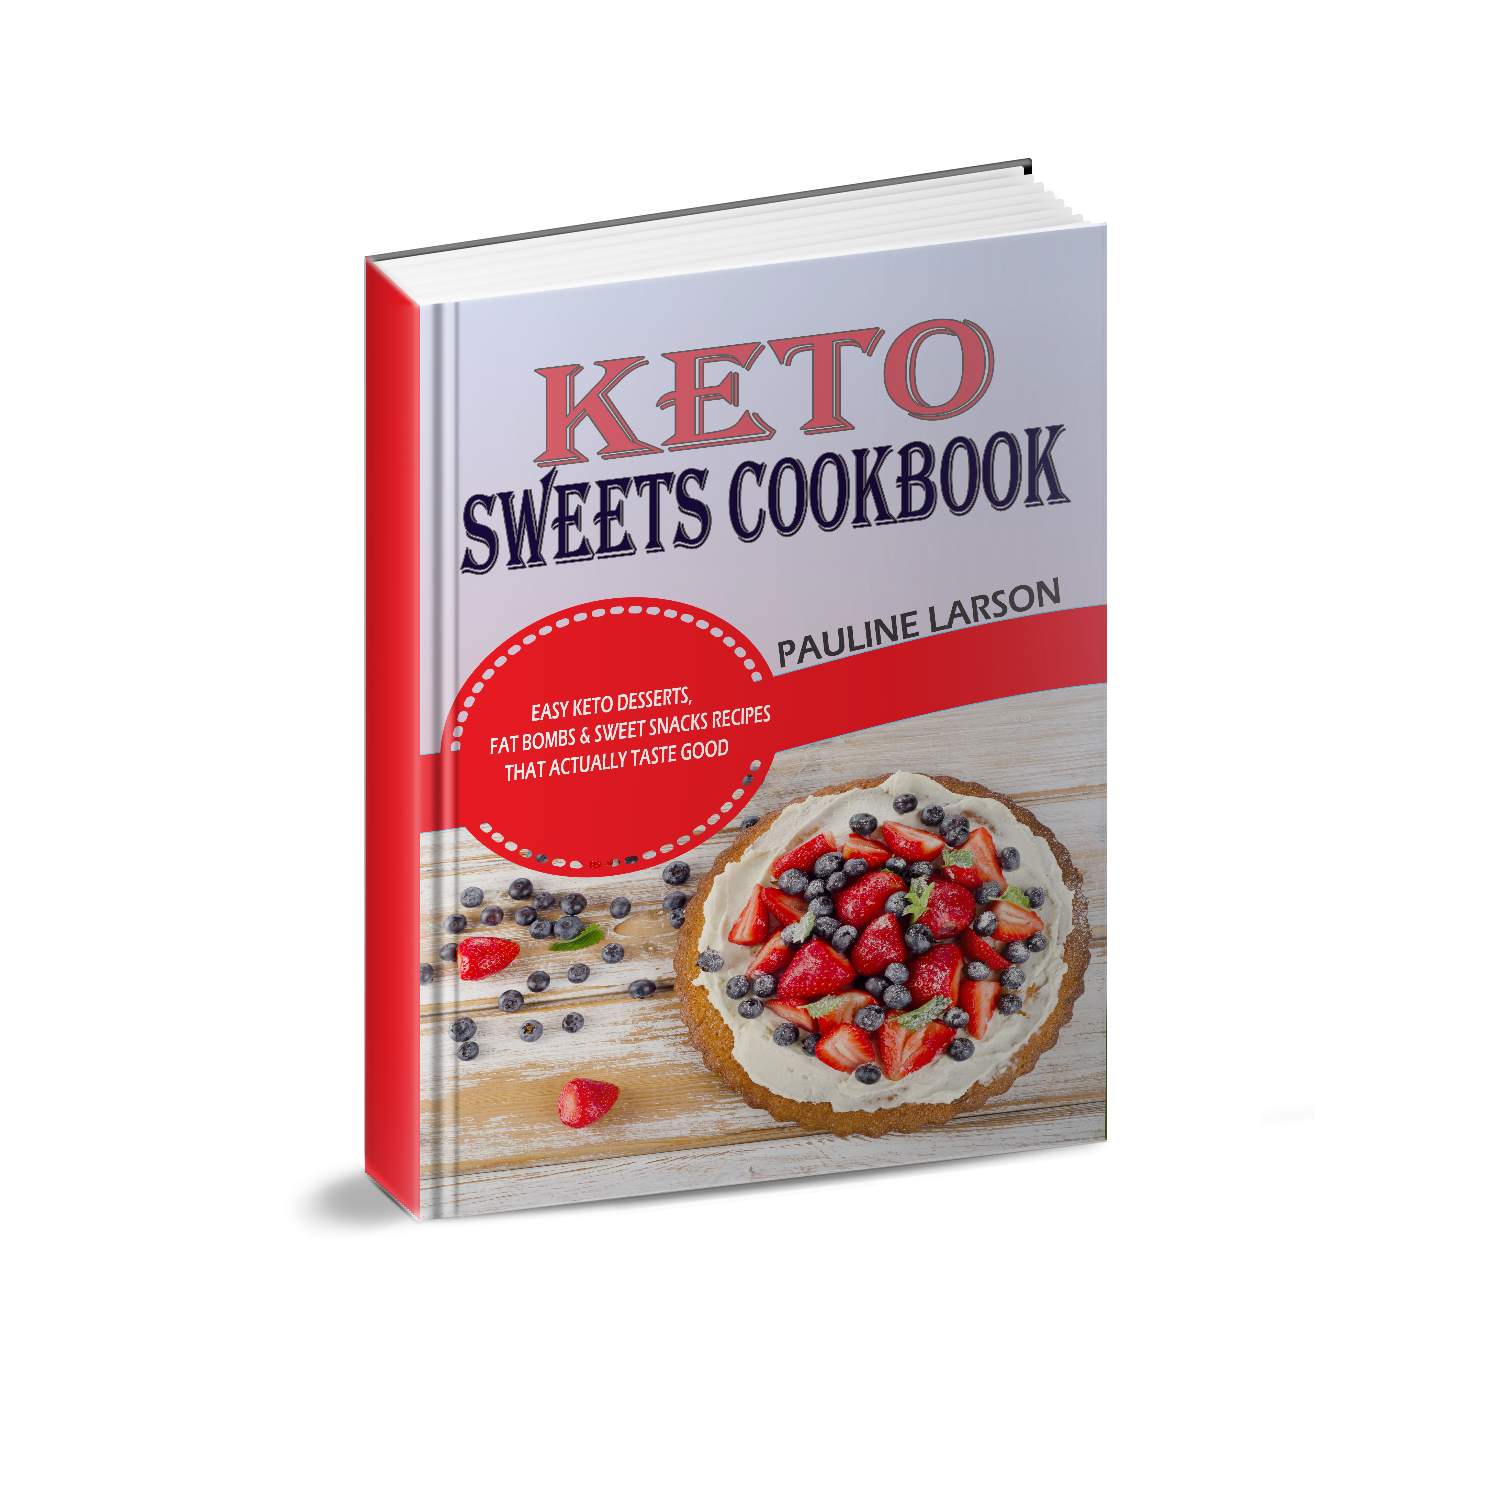 FREE: Keto Sweets Cookbook: Easy Keto Desserts, Fat Bombs & Sweet Snacks Recipes That Actually Taste Good by Pauline Larson